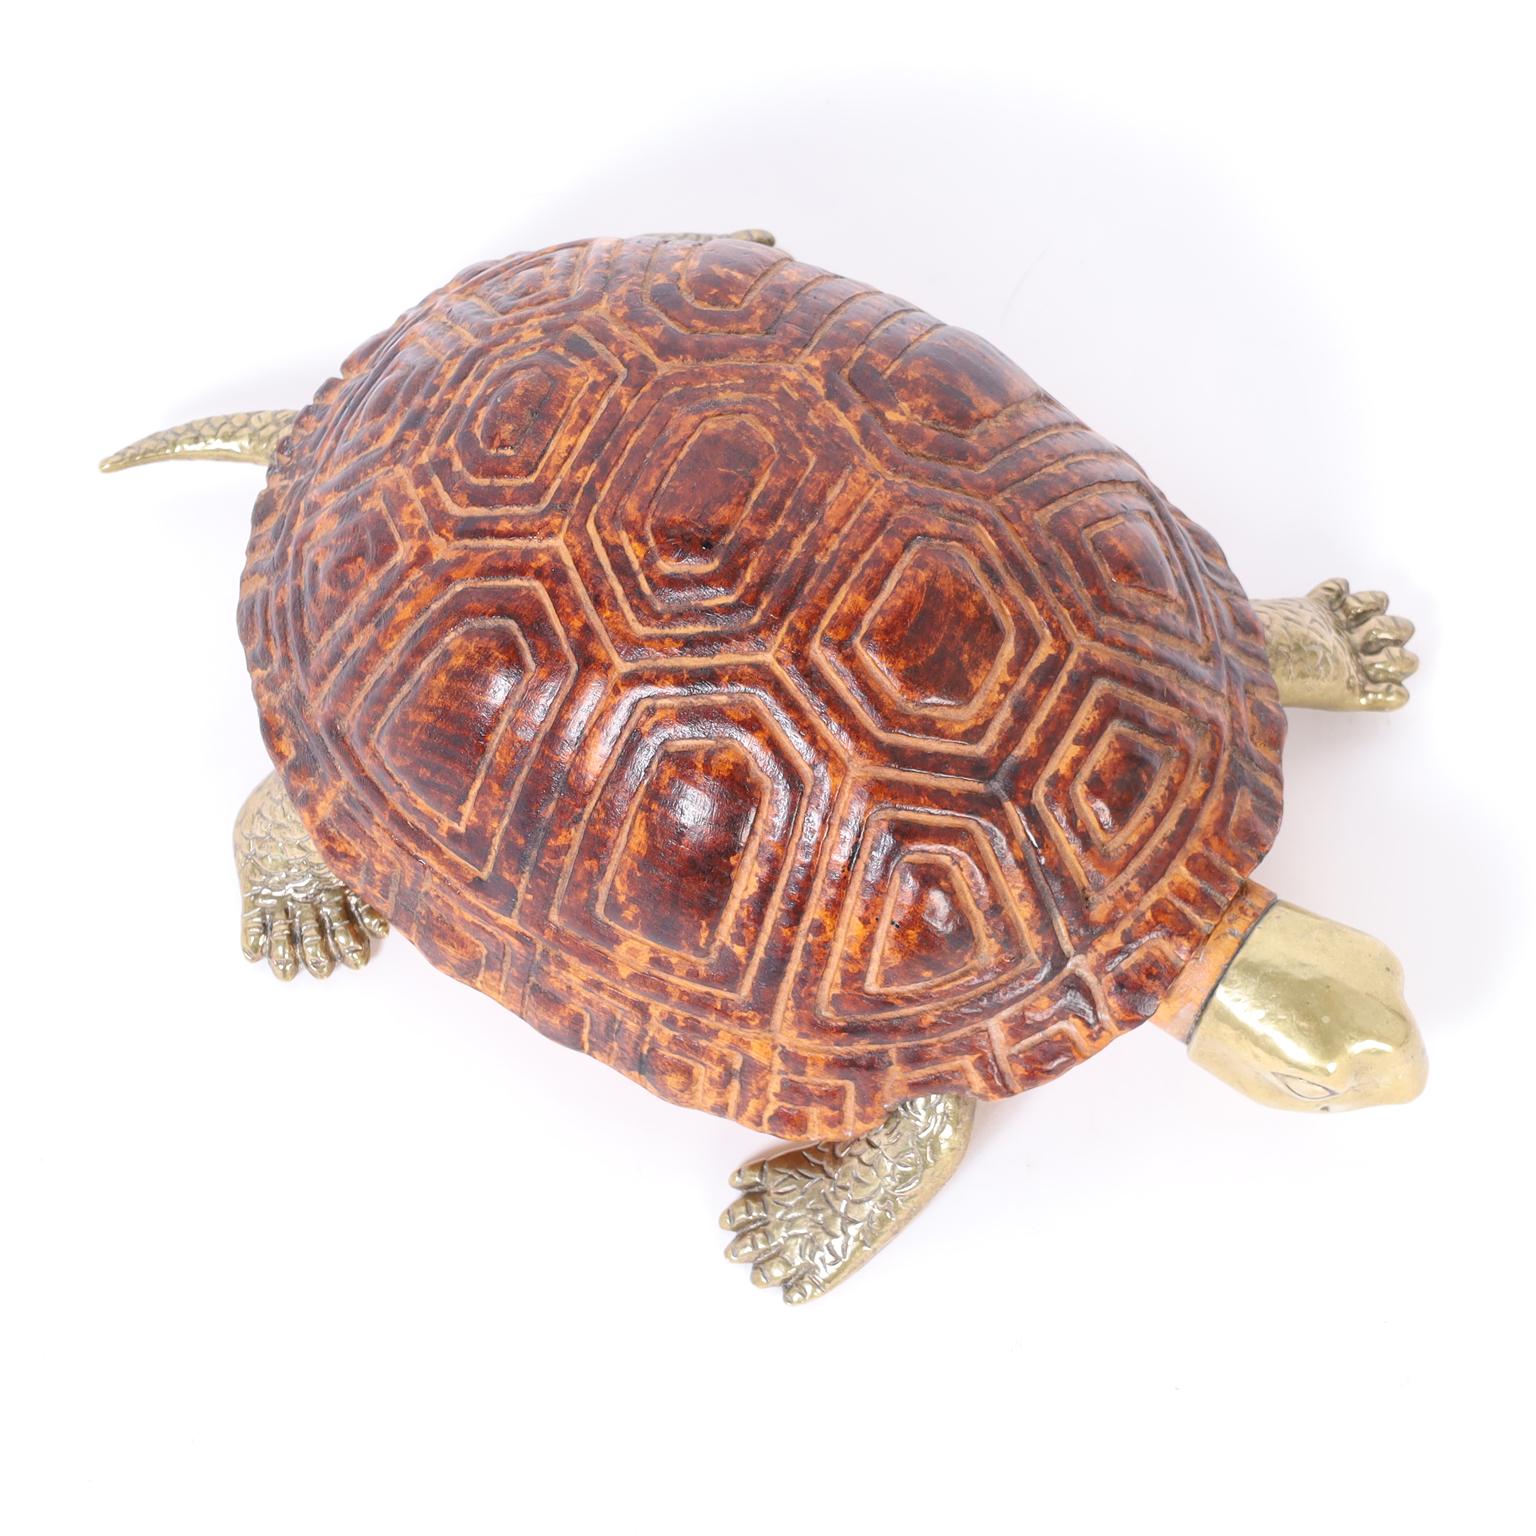 Mid-Century Italian Wood and Brass Turtle or Tortoise with a carved and stained wood shell and cast brass head, feet and tail. Signed and numbered on the bottom.
